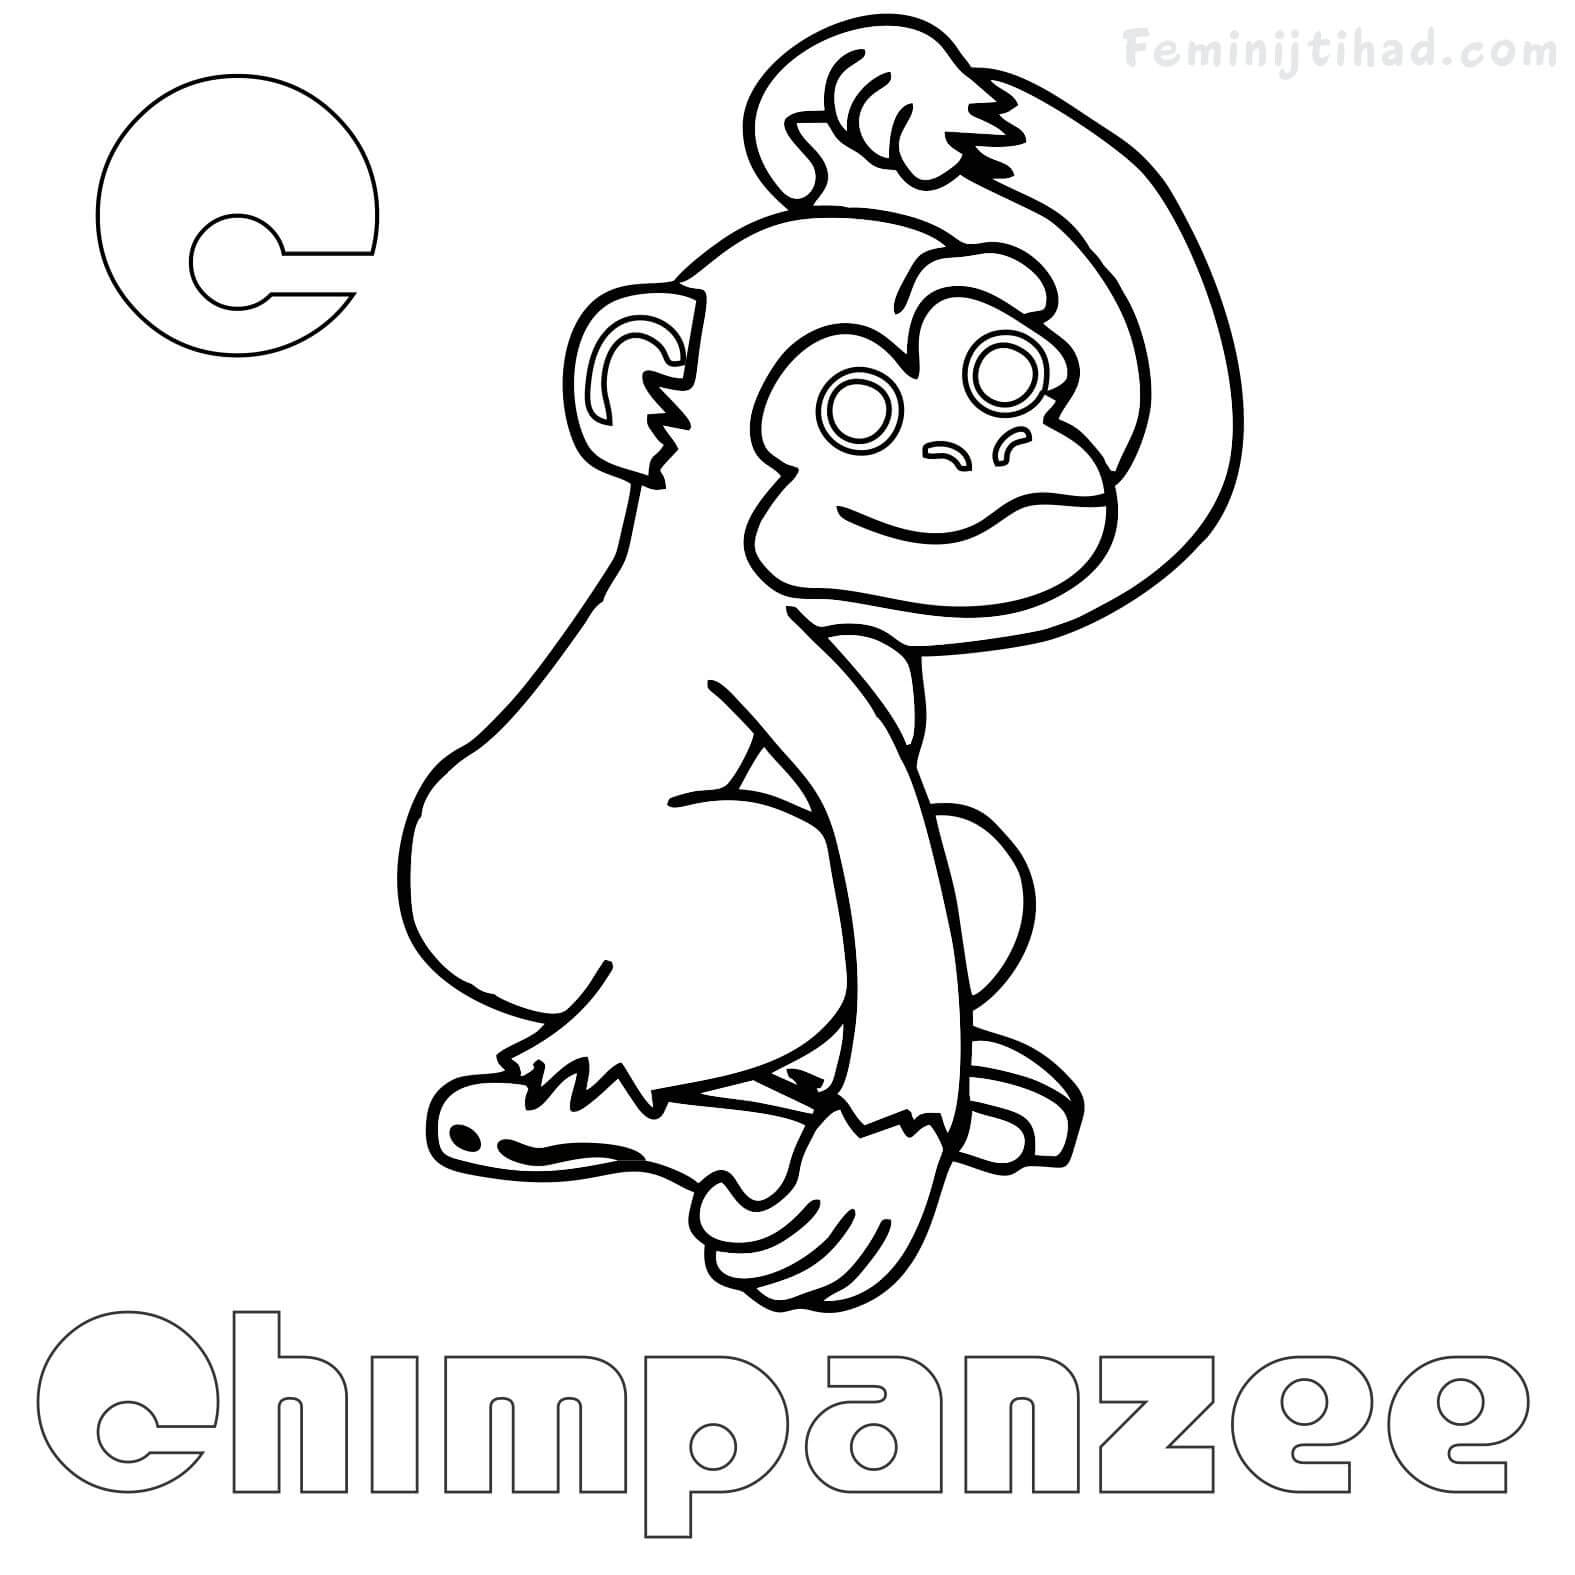 Chimpanzee Coloring Pages C For Chimpanzee Coloring Pages Free Coloring Sheets